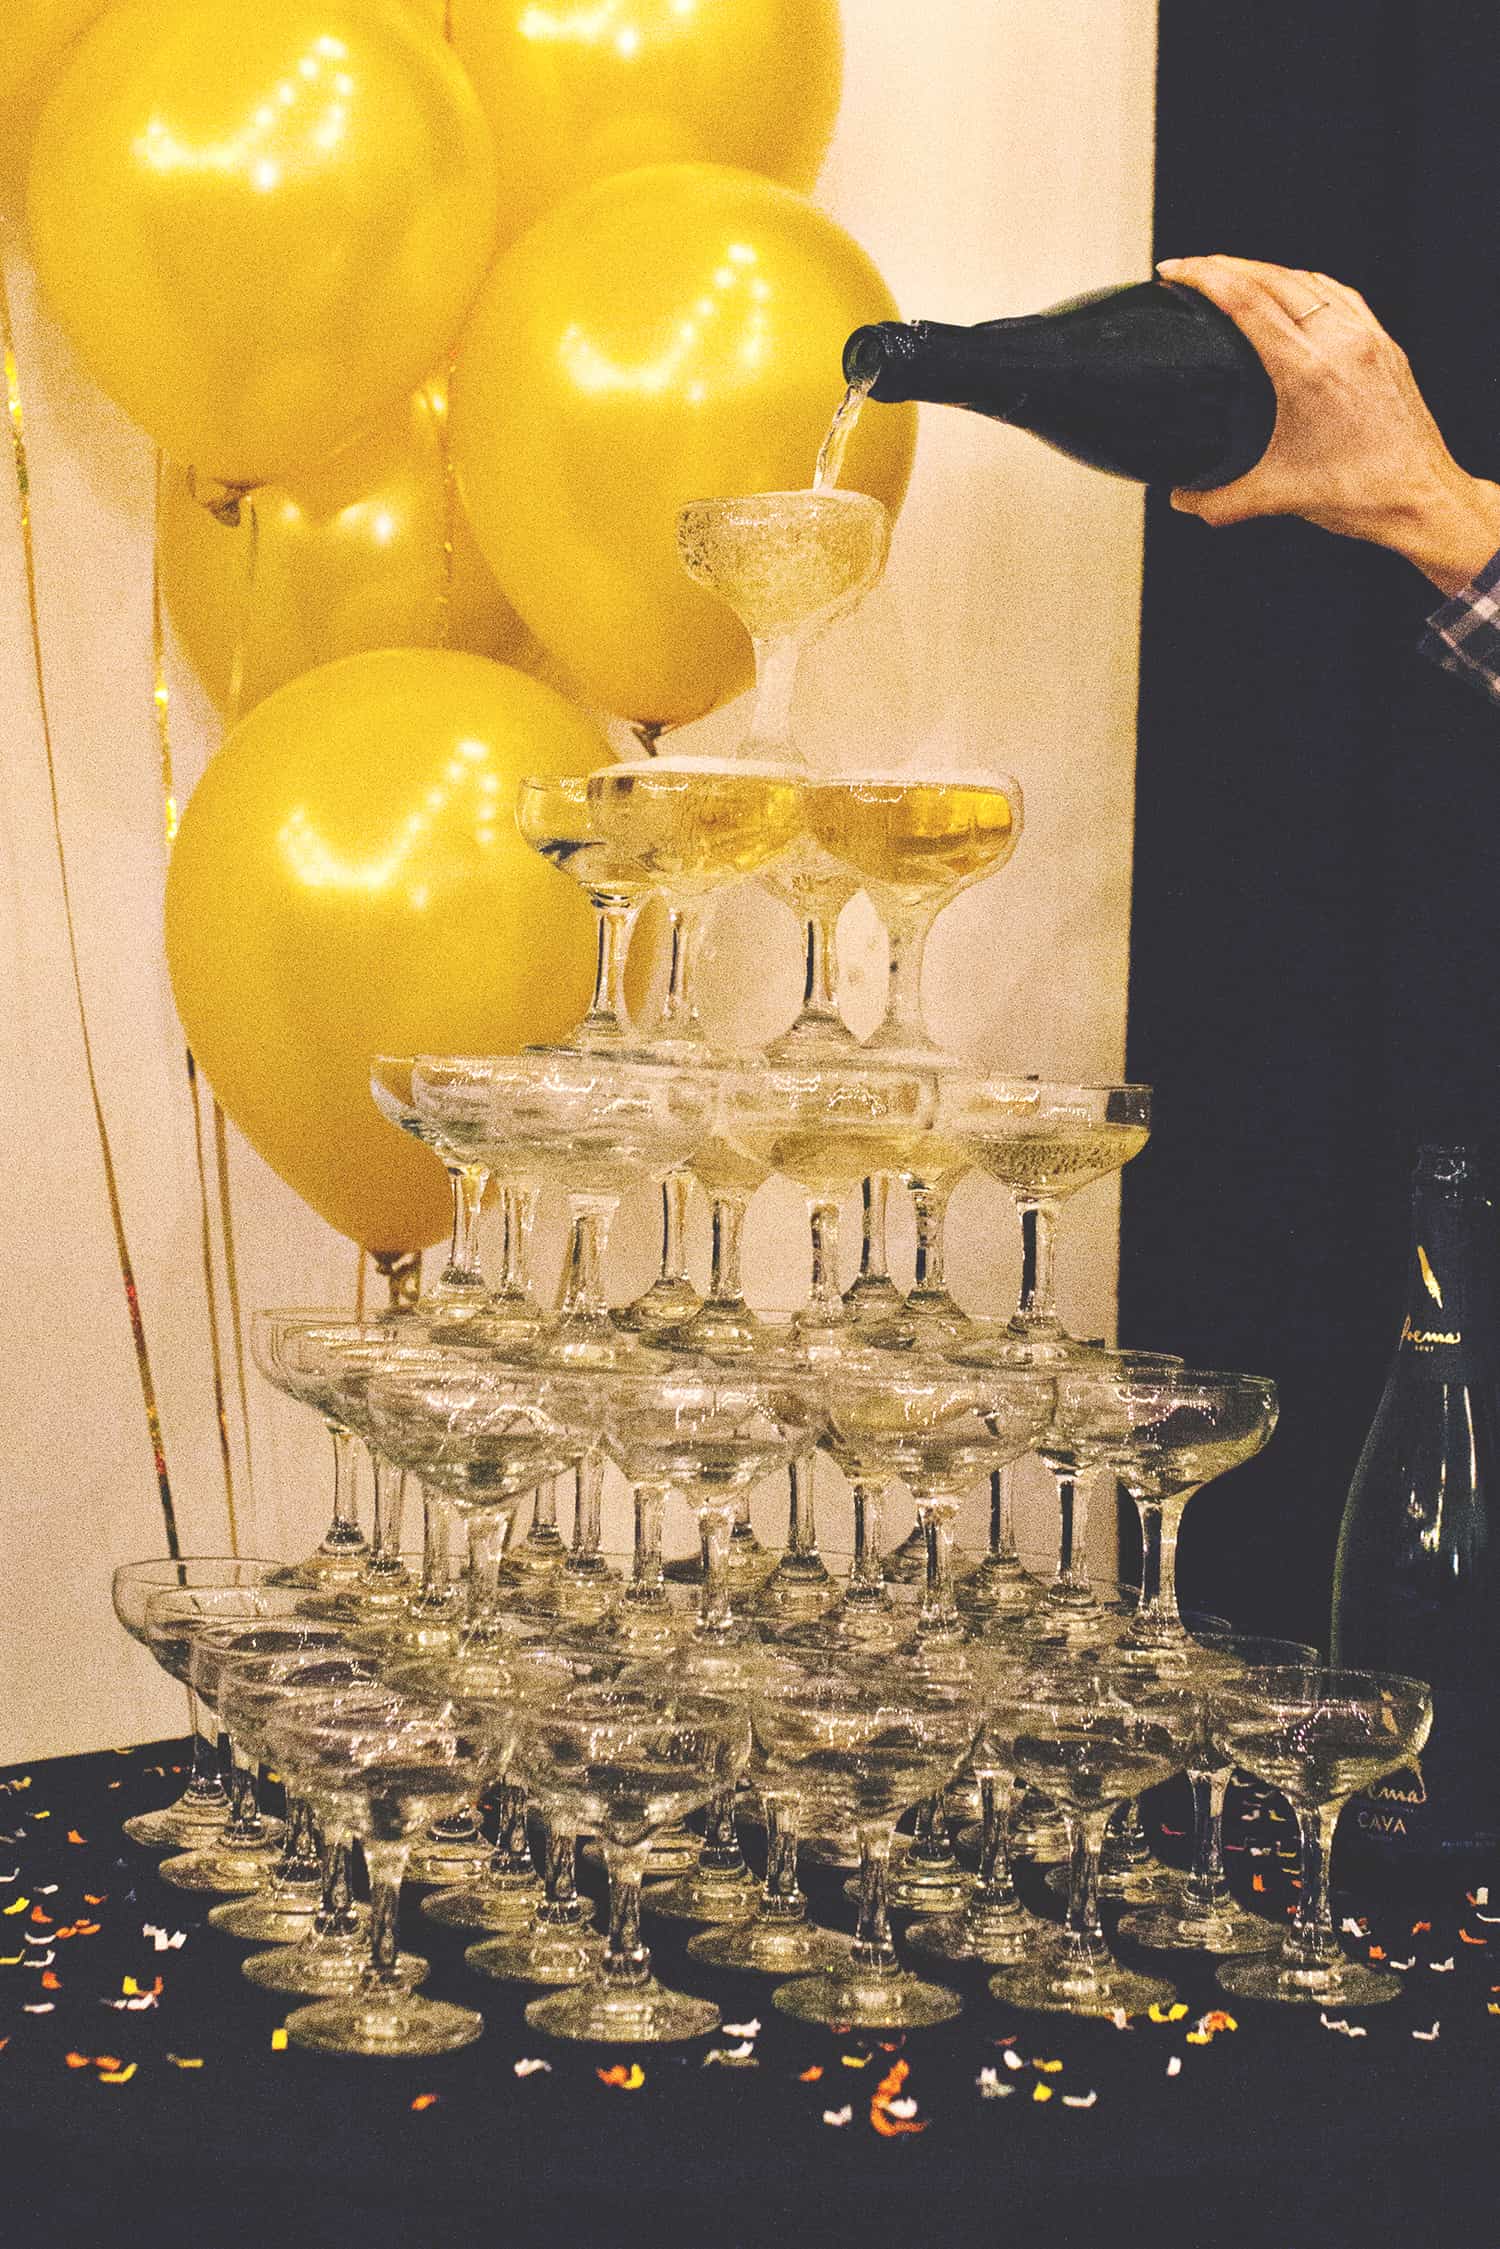 https://abeautifulmess.com/wp-content/uploads/2018/10/how-to-build-a-champagne-tower-.jpg